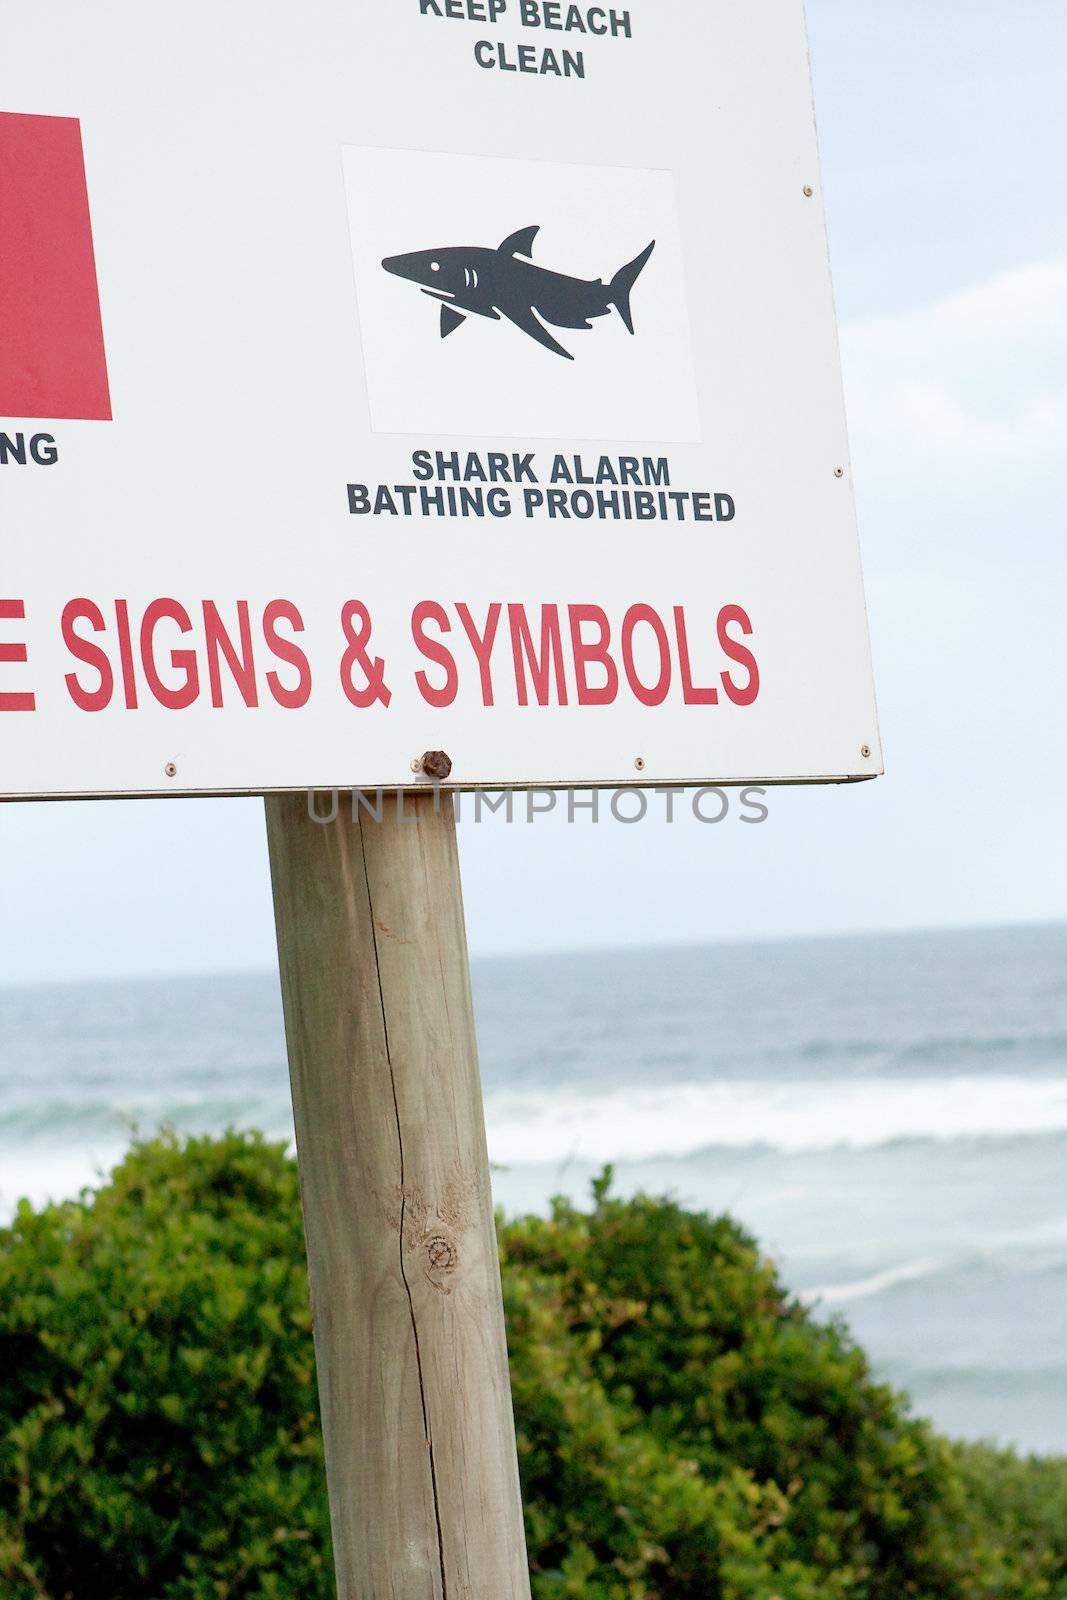 Shark alert symbol on a beach sign with waves in background